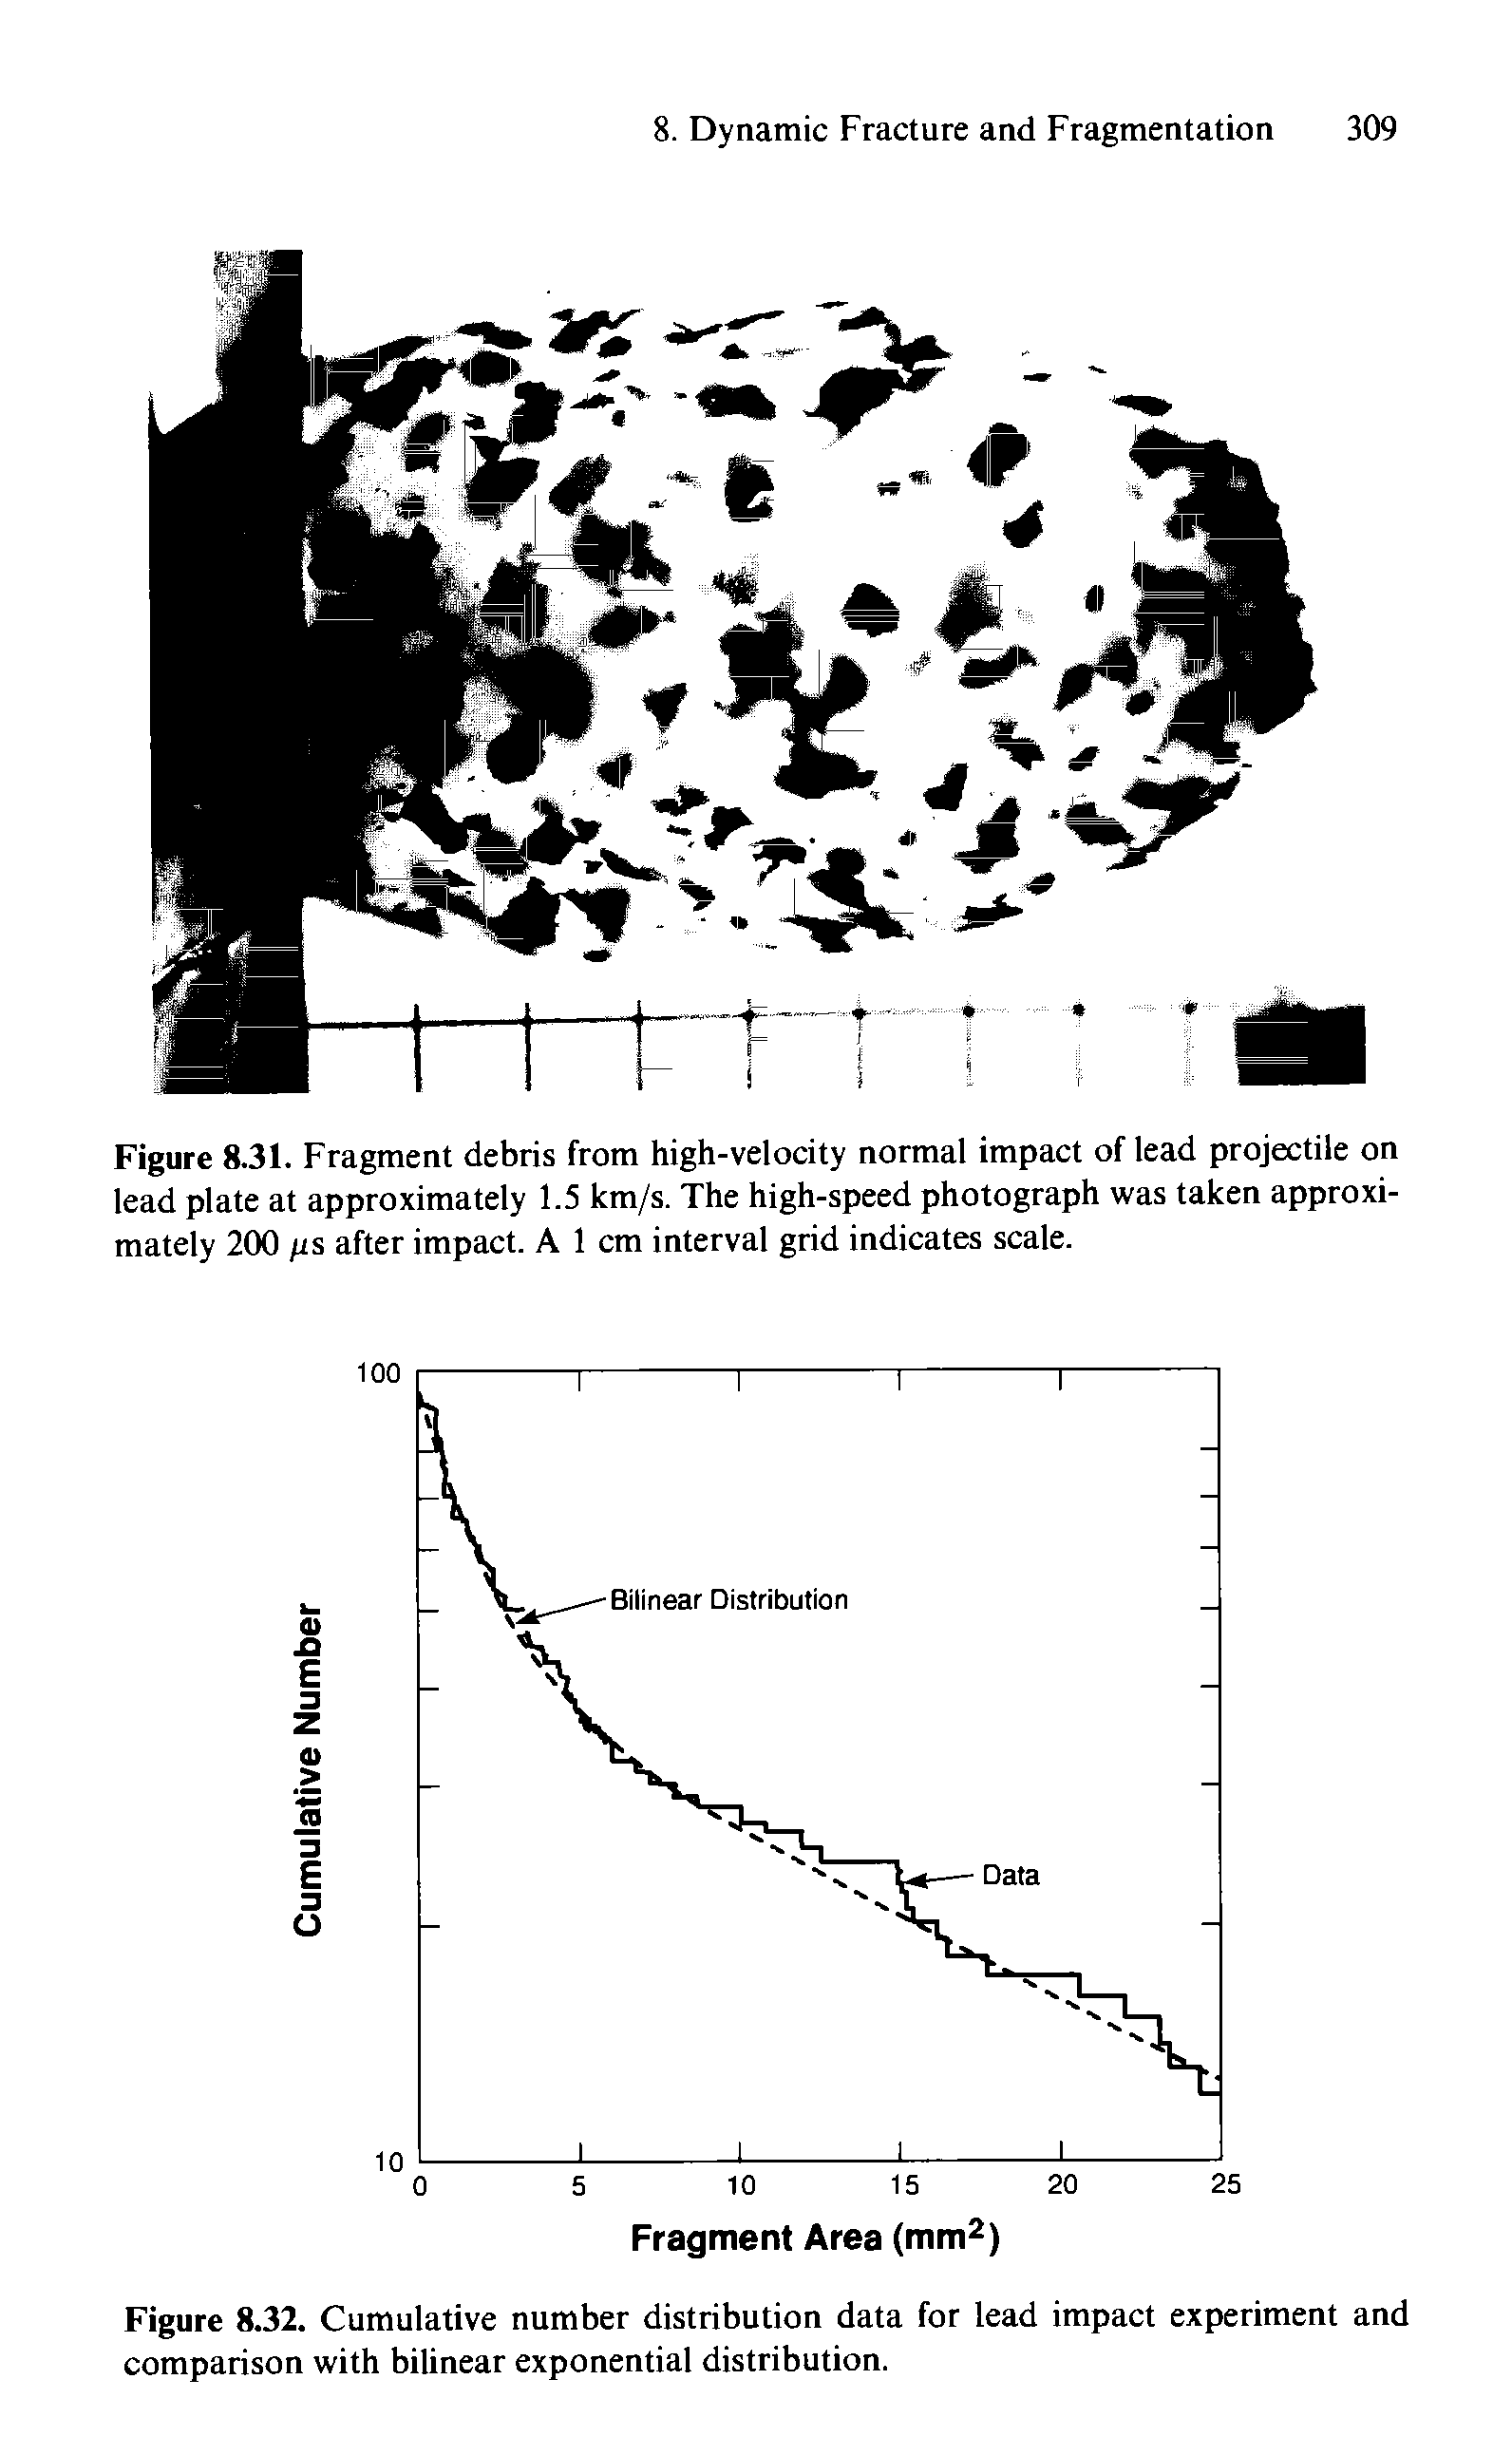 Figure 8.32. Cumulative number distribution data for lead impact experiment and comparison with bilinear exponential distribution.